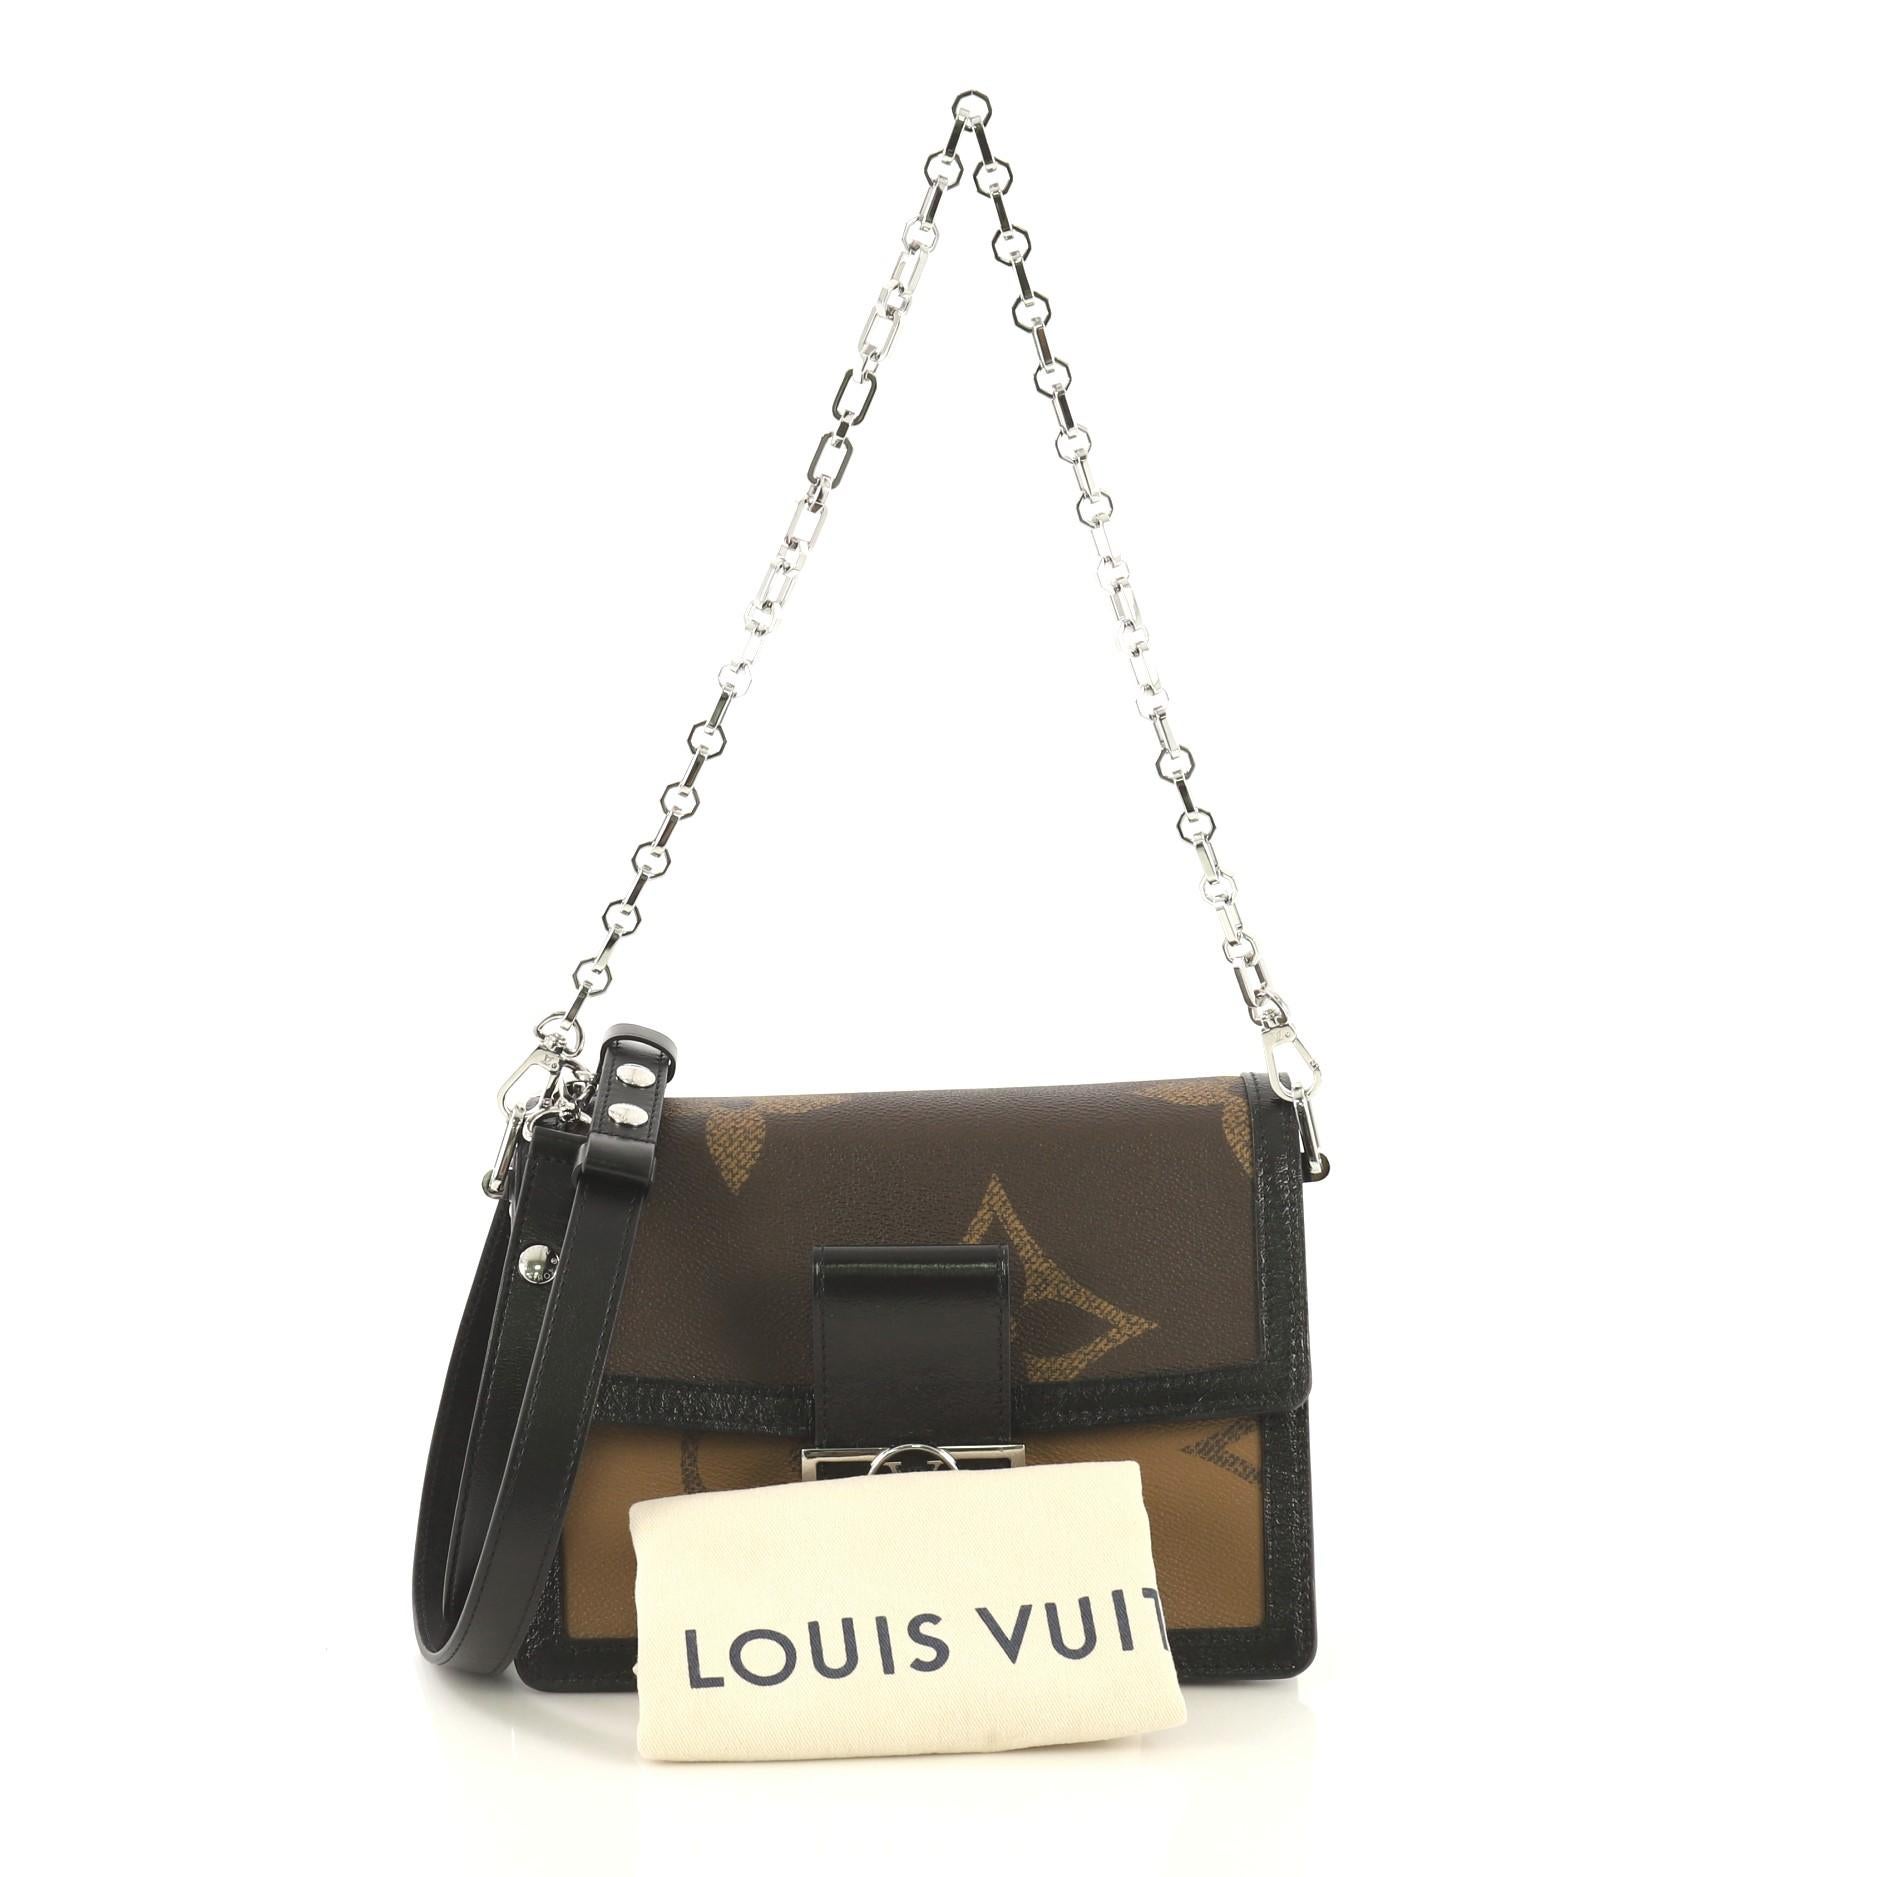 This Louis Vuitton Dauphine Shoulder Bag Limited Edition Reverse Monogram Giant MM, crafted from brown reverse monogram coated canvas, features a flat leather strap, chain strap, leather trim, LV logo on flap, and silver-tone hardware. Its magnetic